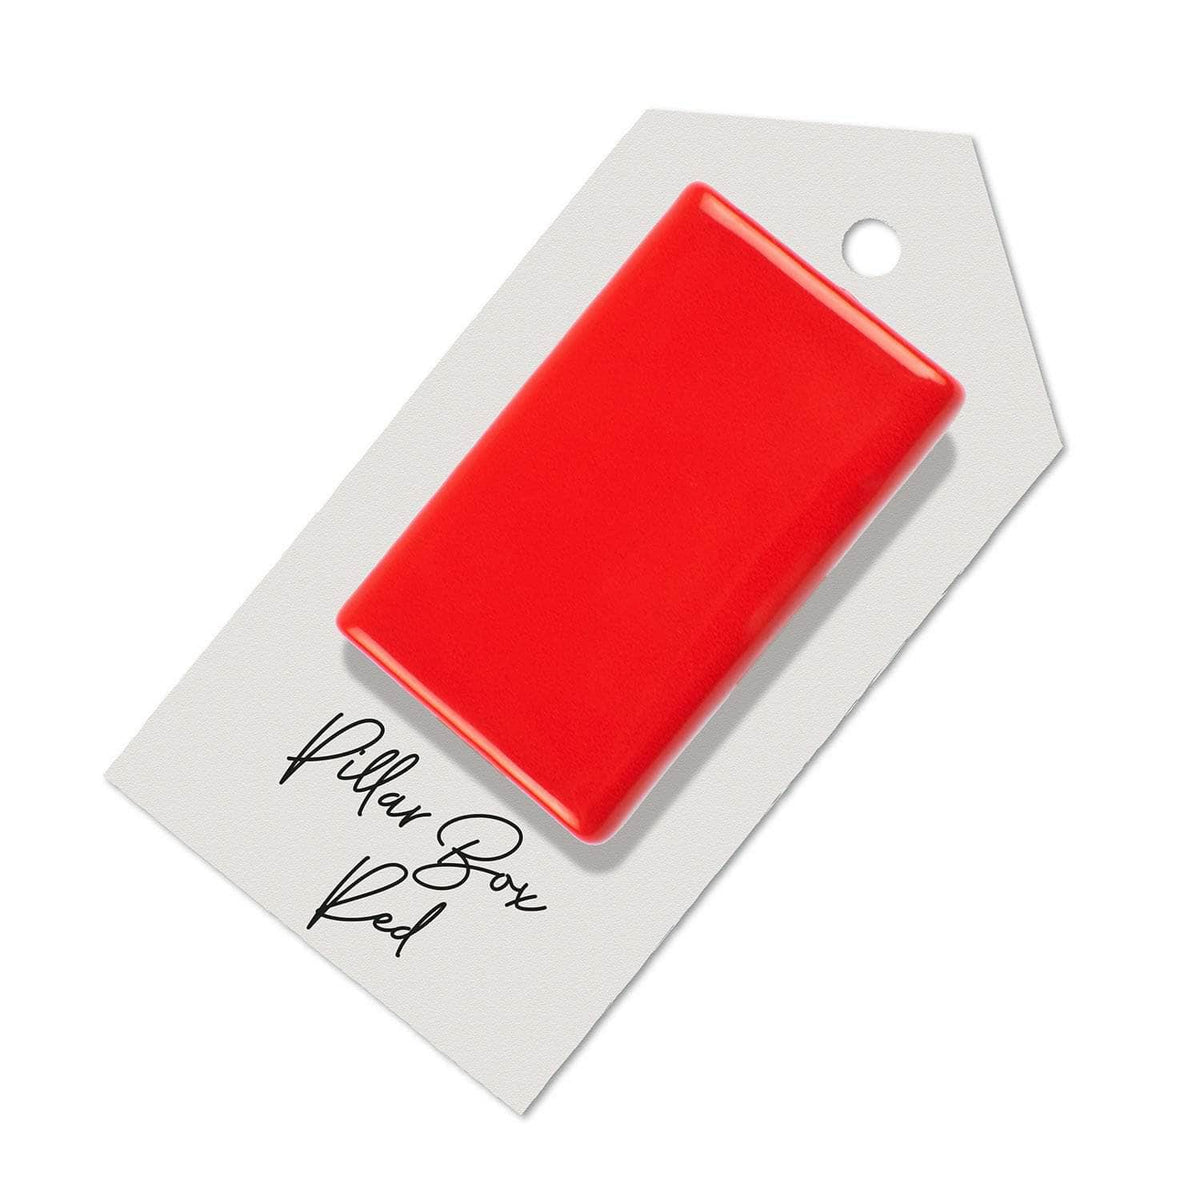 Pillar Box Red sample for Aga range cooker re-enamelling &amp; reconditioned cookers